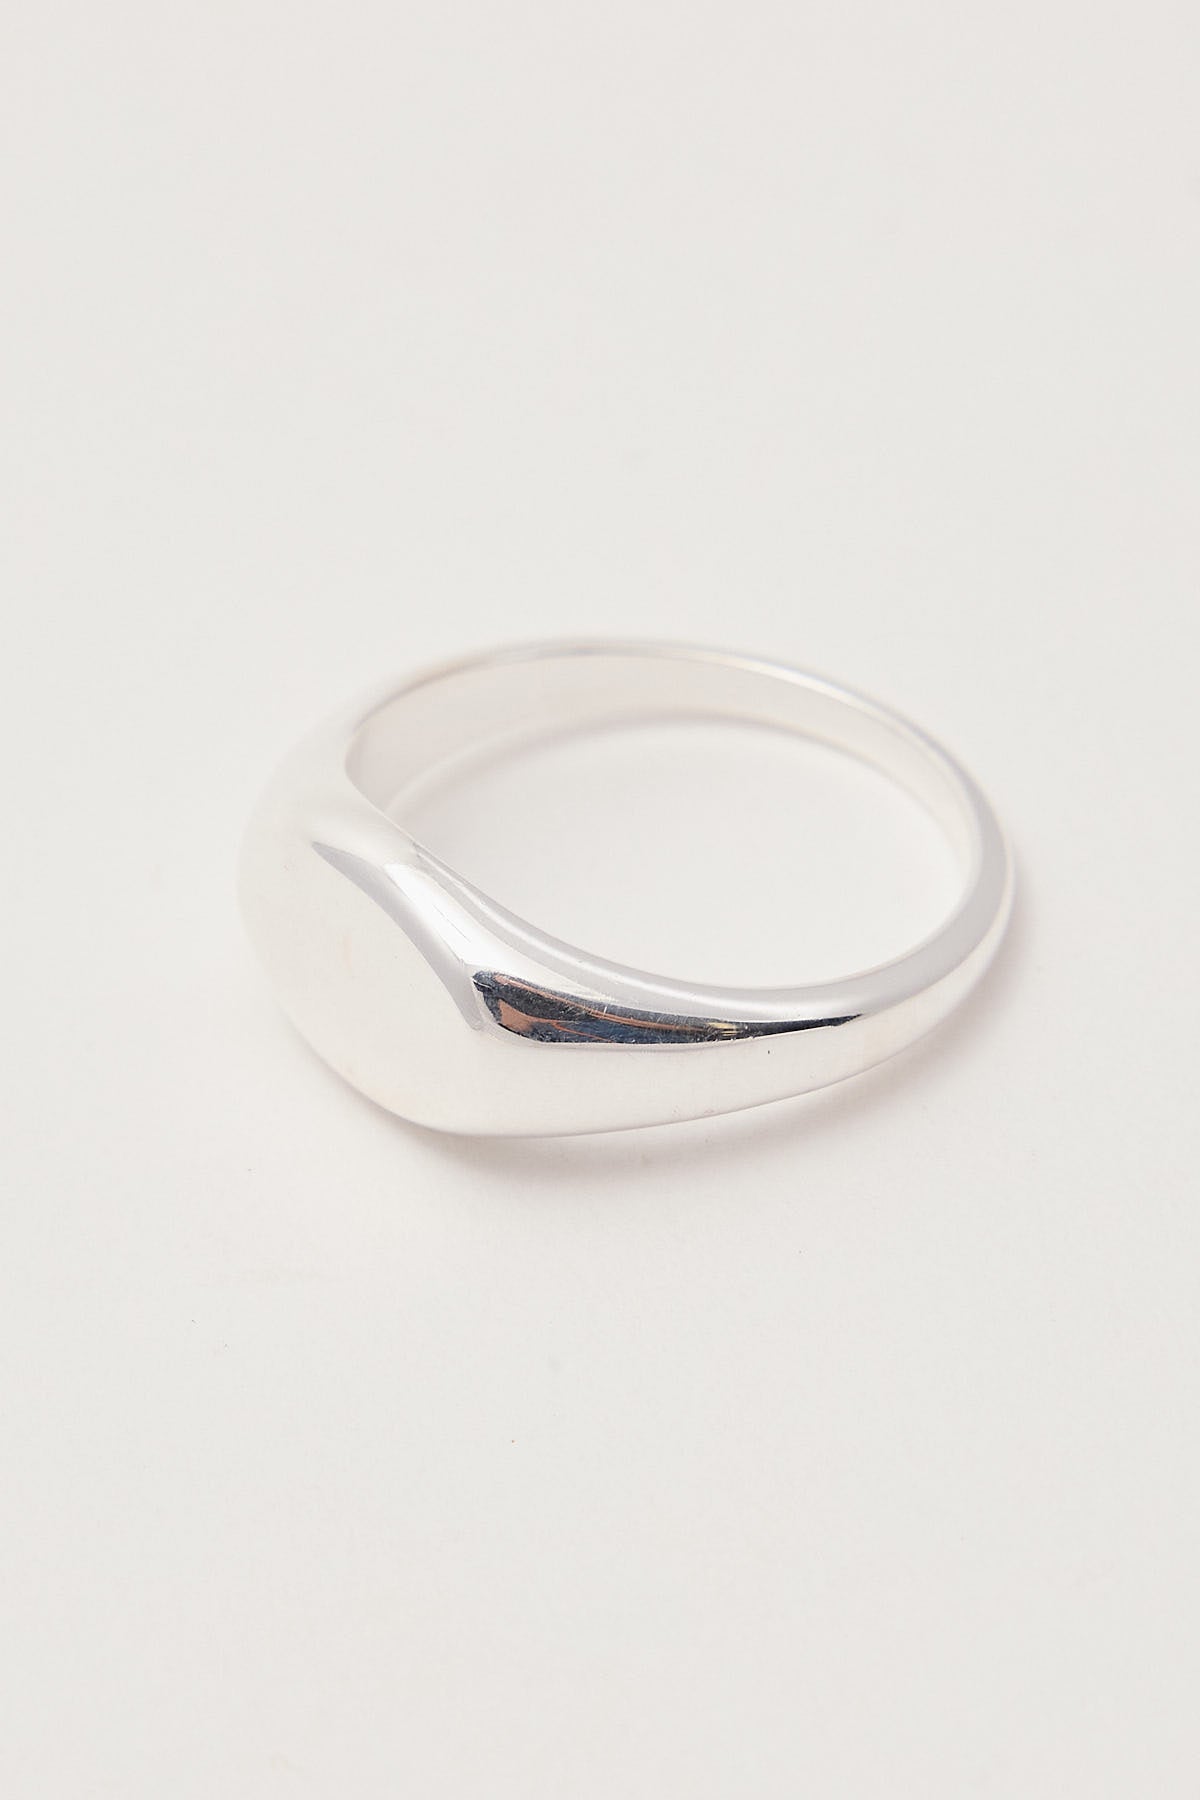 Neovision End Sterling Silver Signet Ring Sterling Silver